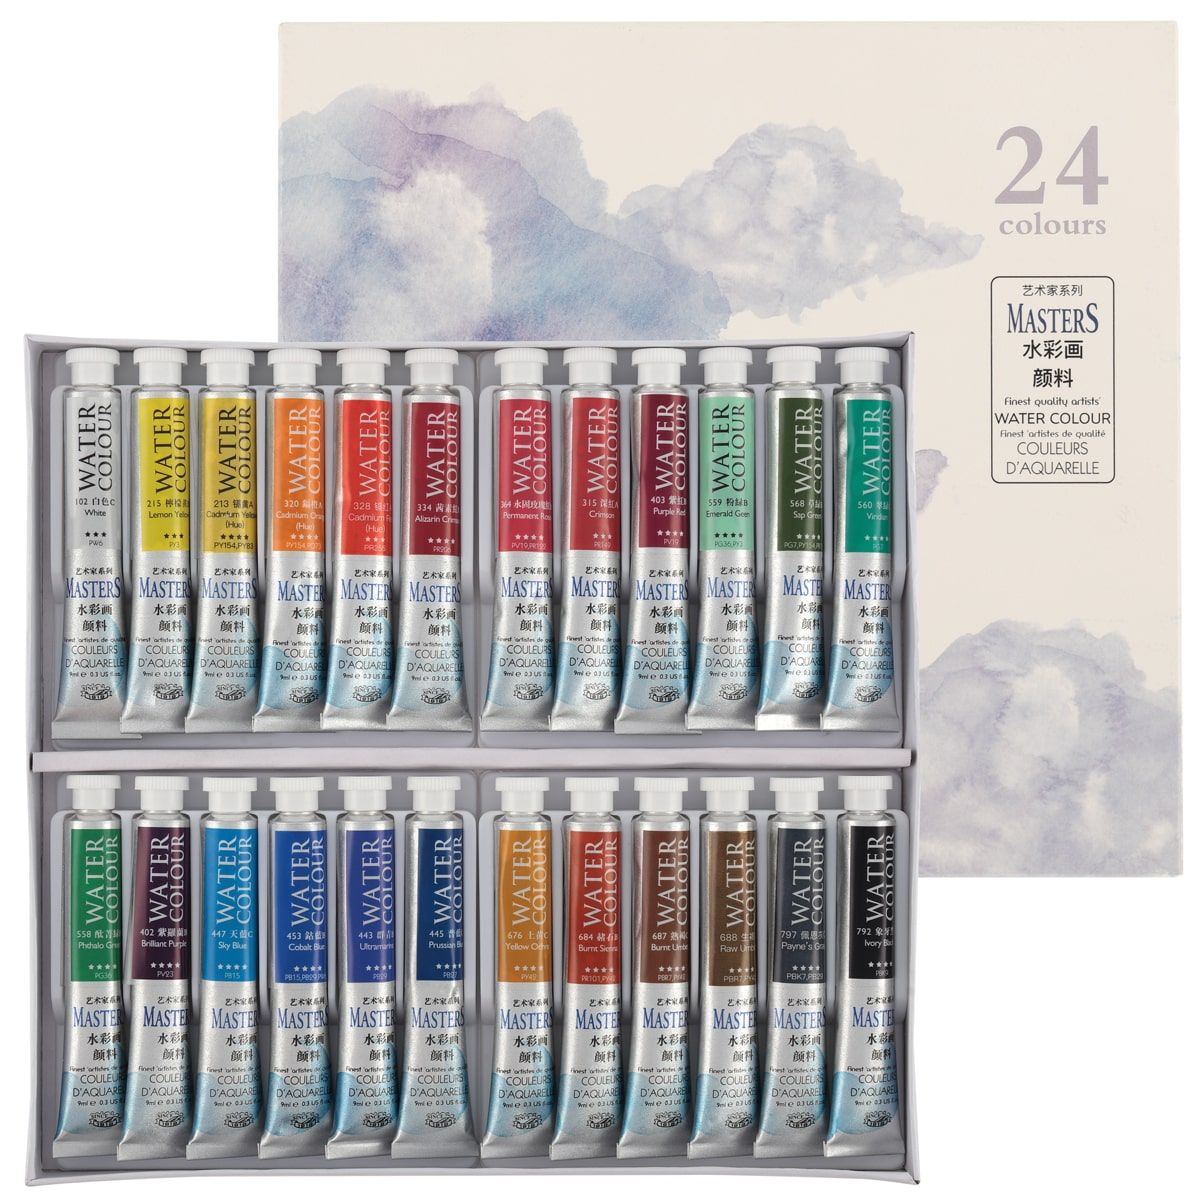 Marie's Master Quality Watercolor 24 Tube Set (9ml) 